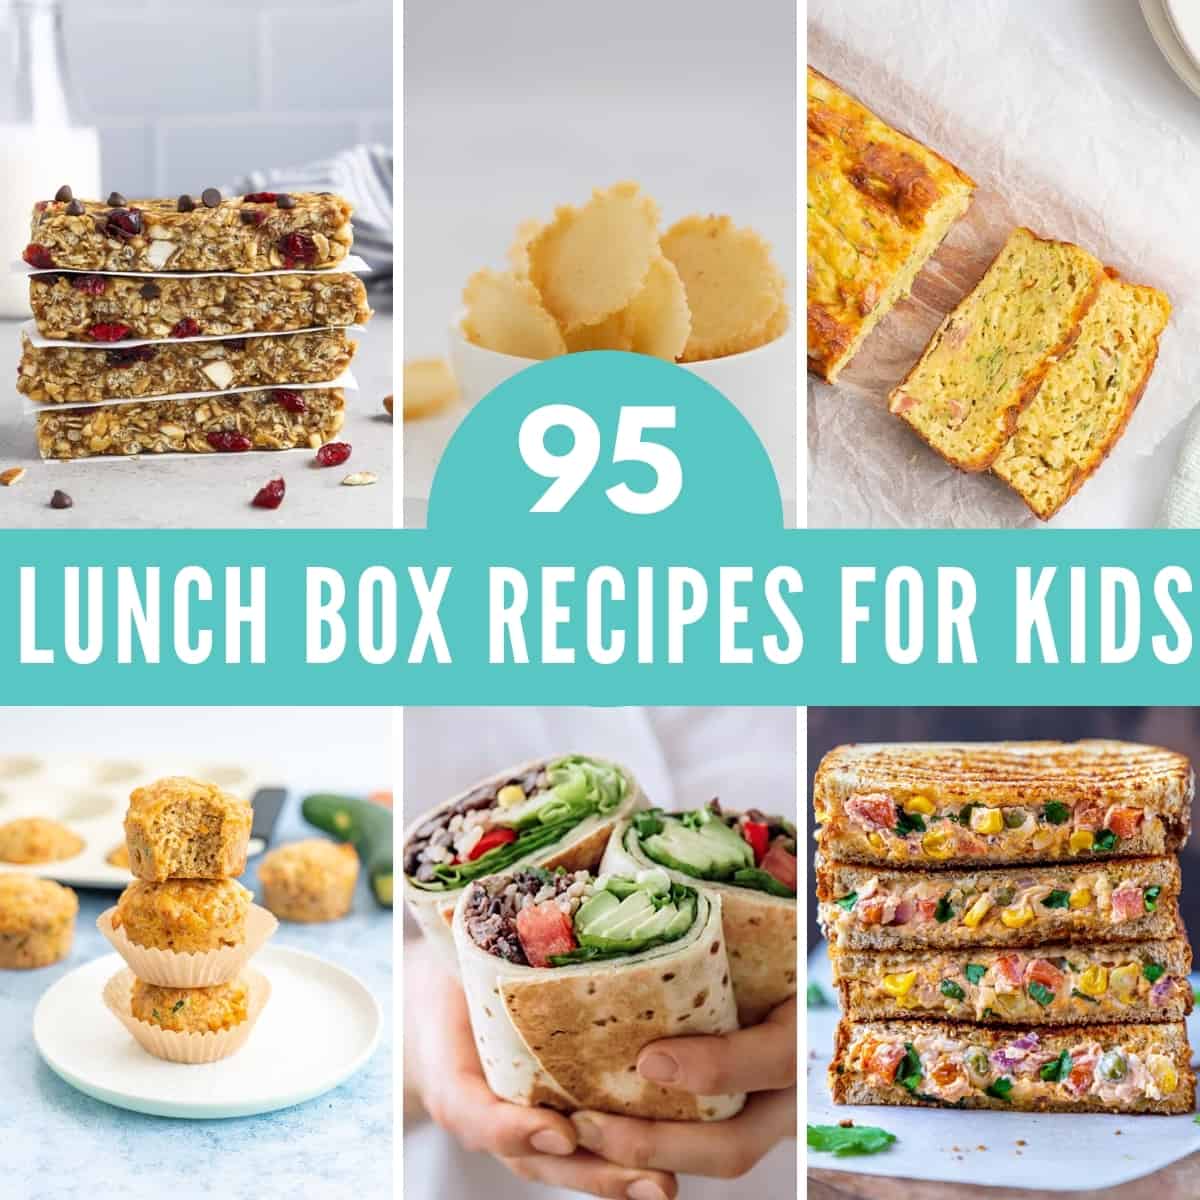 How to pack the best healthy kid lunches - 6 guidelines